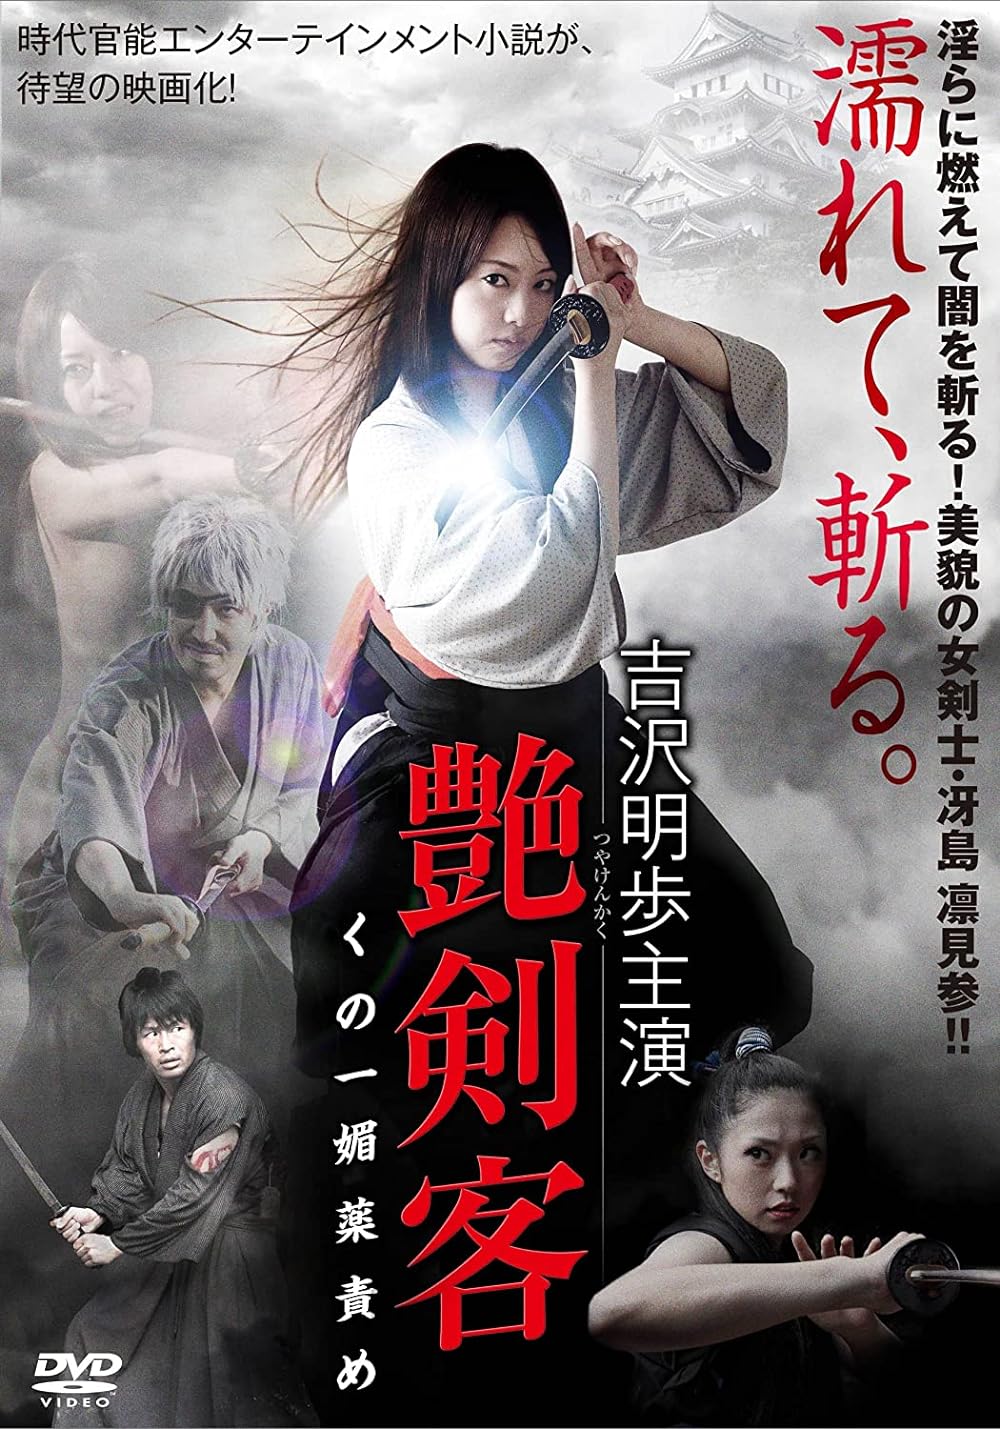 18+The Sultry Assassin The Aphrodisiac Kill 2010 Japanese 300MB HDRip 480p Download